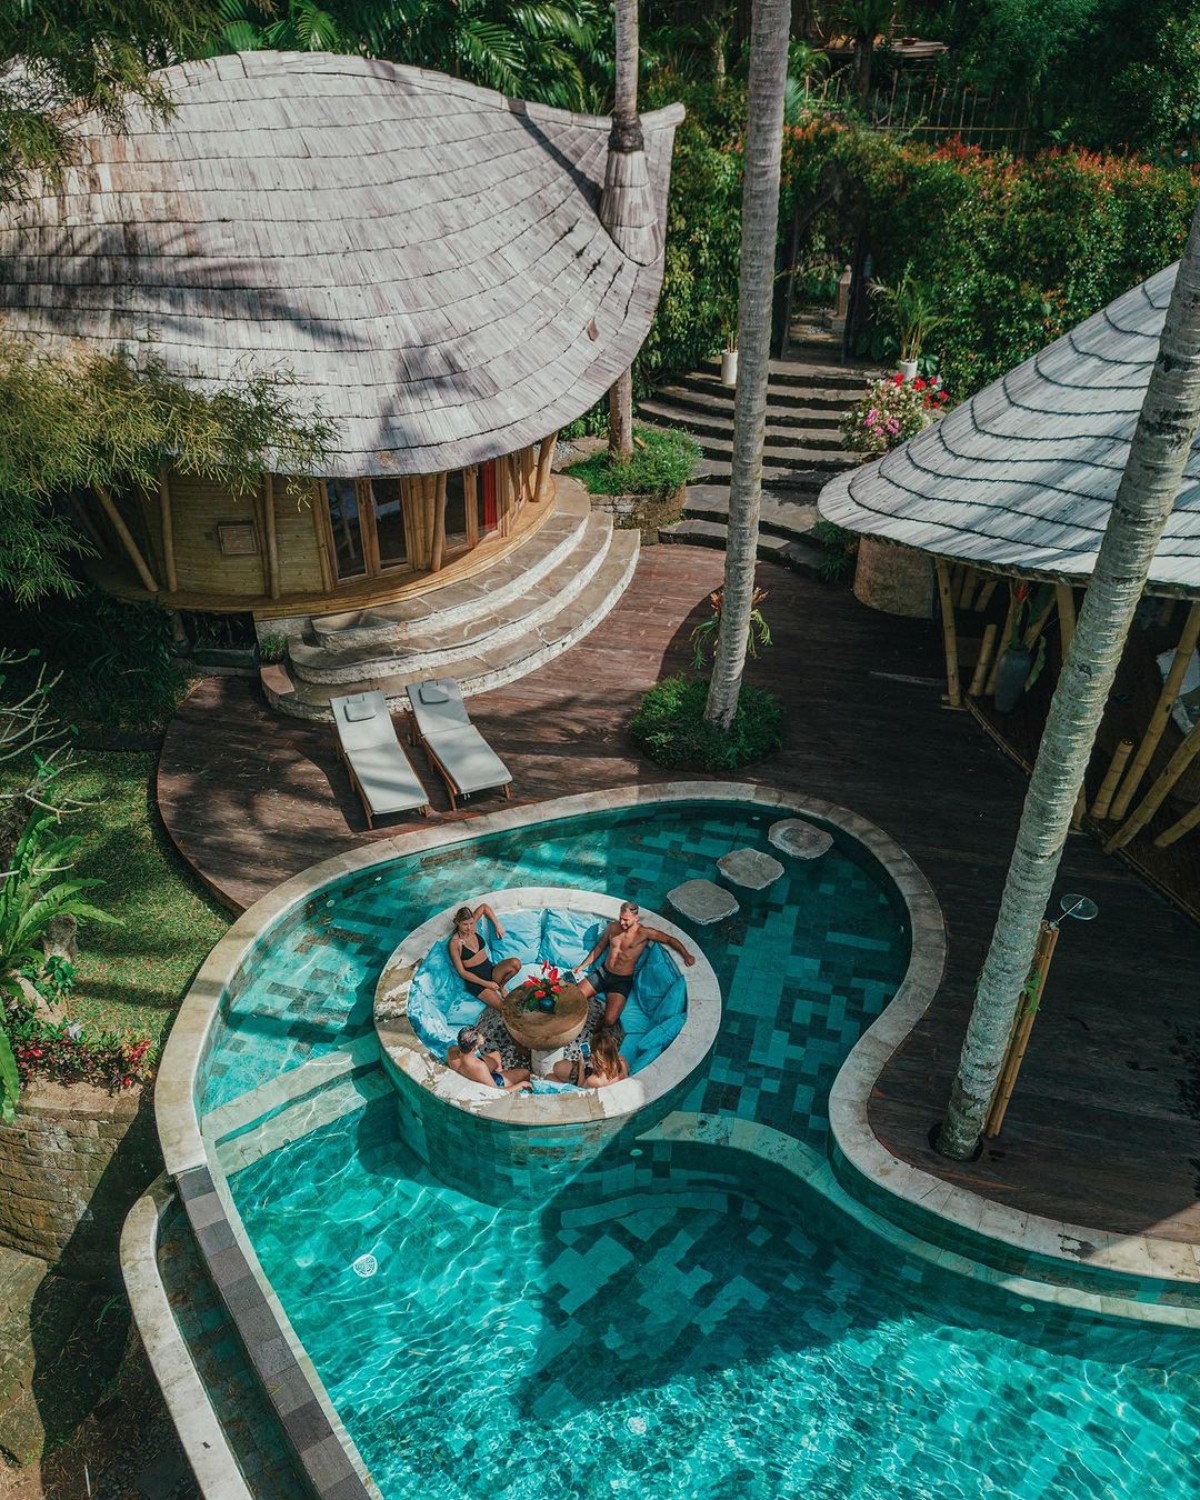 Bamboo eco-house overlooking a unique pool with guests lounging in Ubud, Bali.